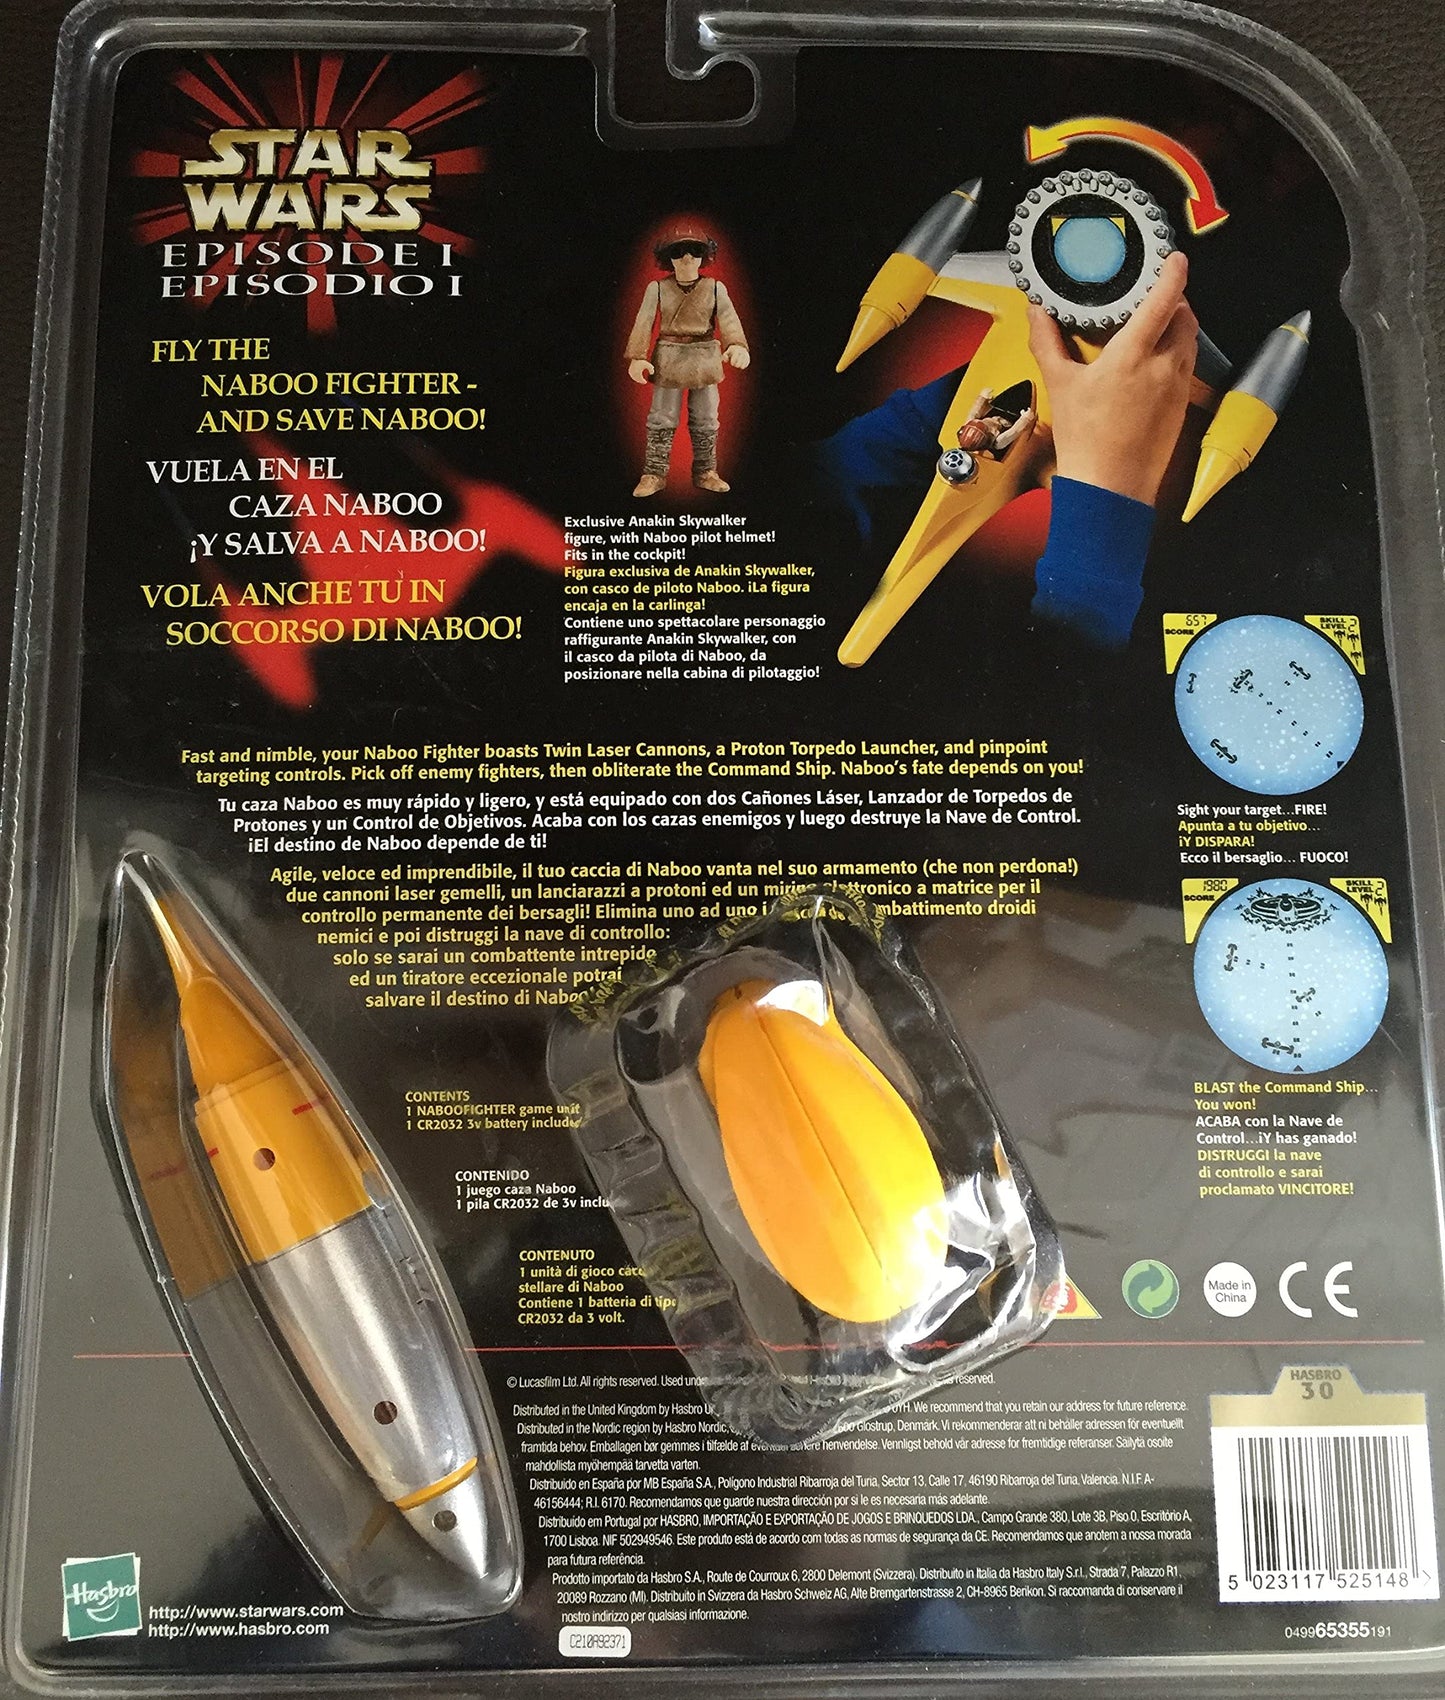 Vintage 1999 Star Wars Episode 1 The Phantom Menace Naboo Fighter Electronic Hand Held Game With Exclusive Anakin Skywalker Action Figure - Brand New Factory Sealed Shop Stock Room Find